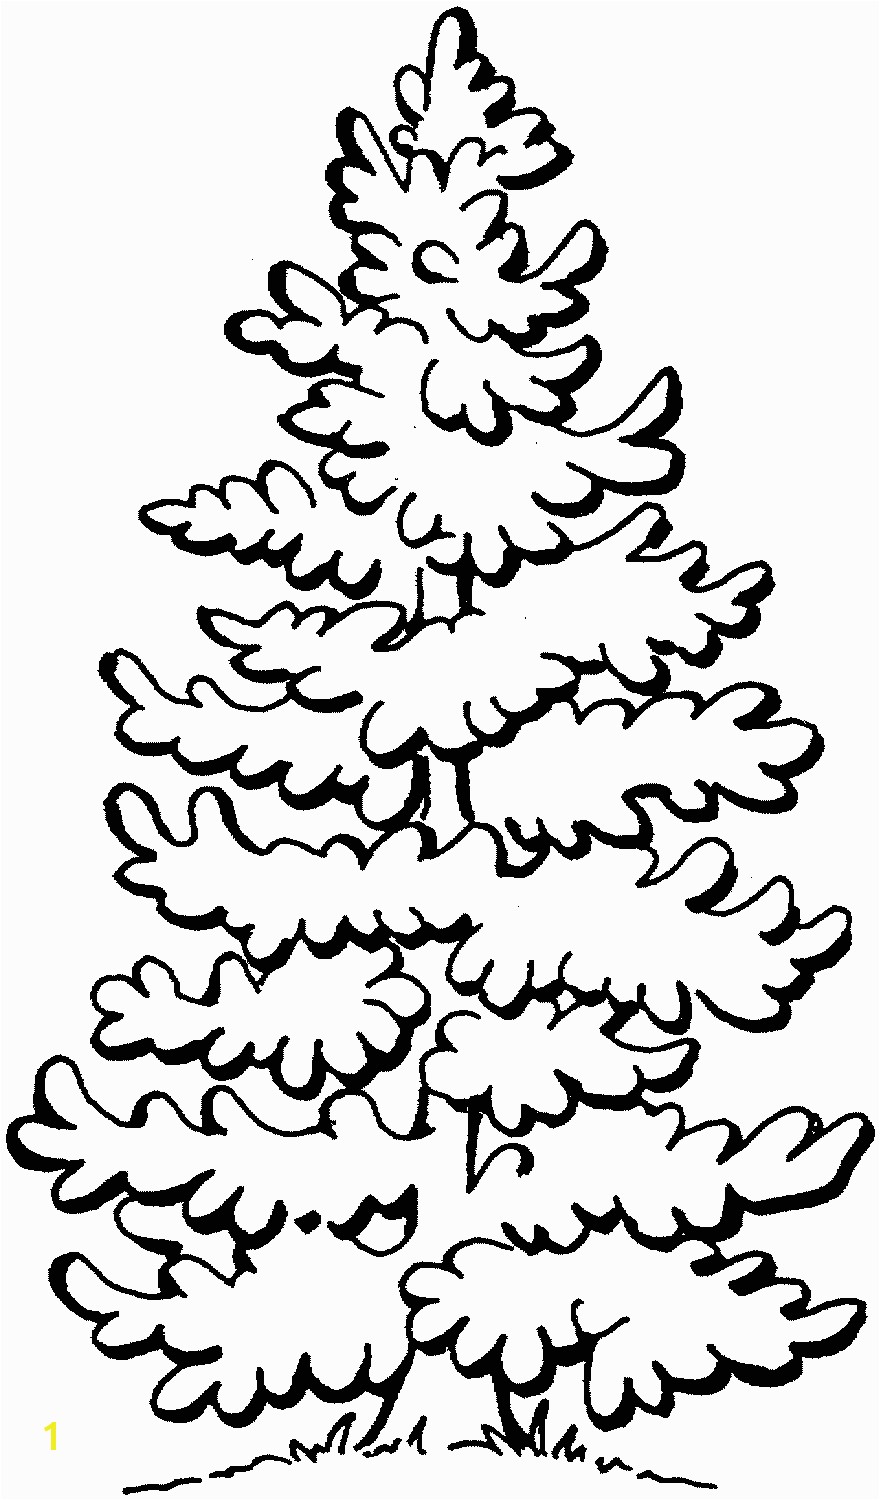 White Pine Tree Coloring Page Pine Tree 1 Coloring Page 8801 500 Pixels